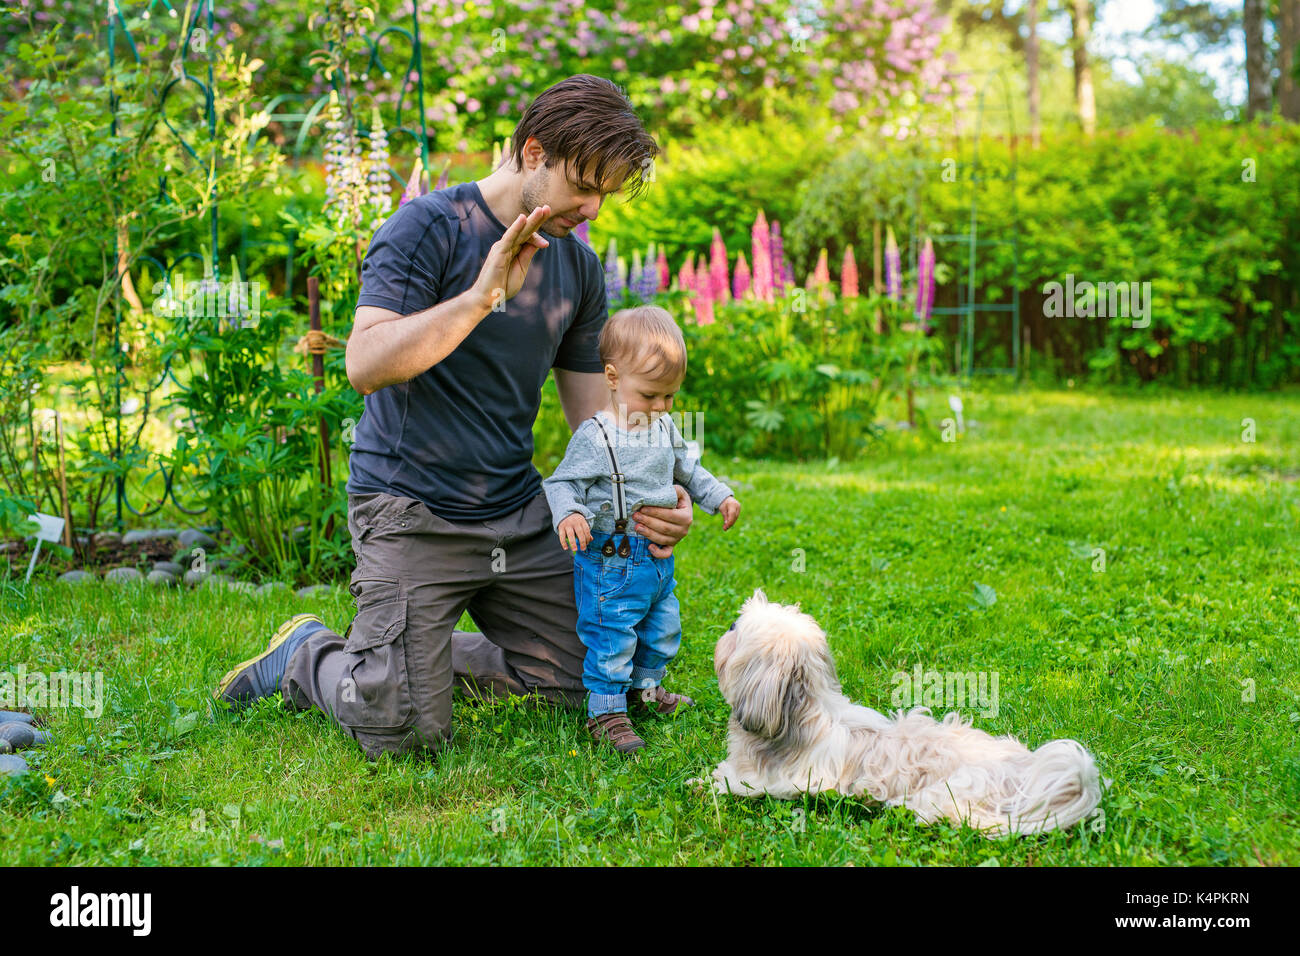 Father teaching son how to command the dog in summer green garden Stock Photo